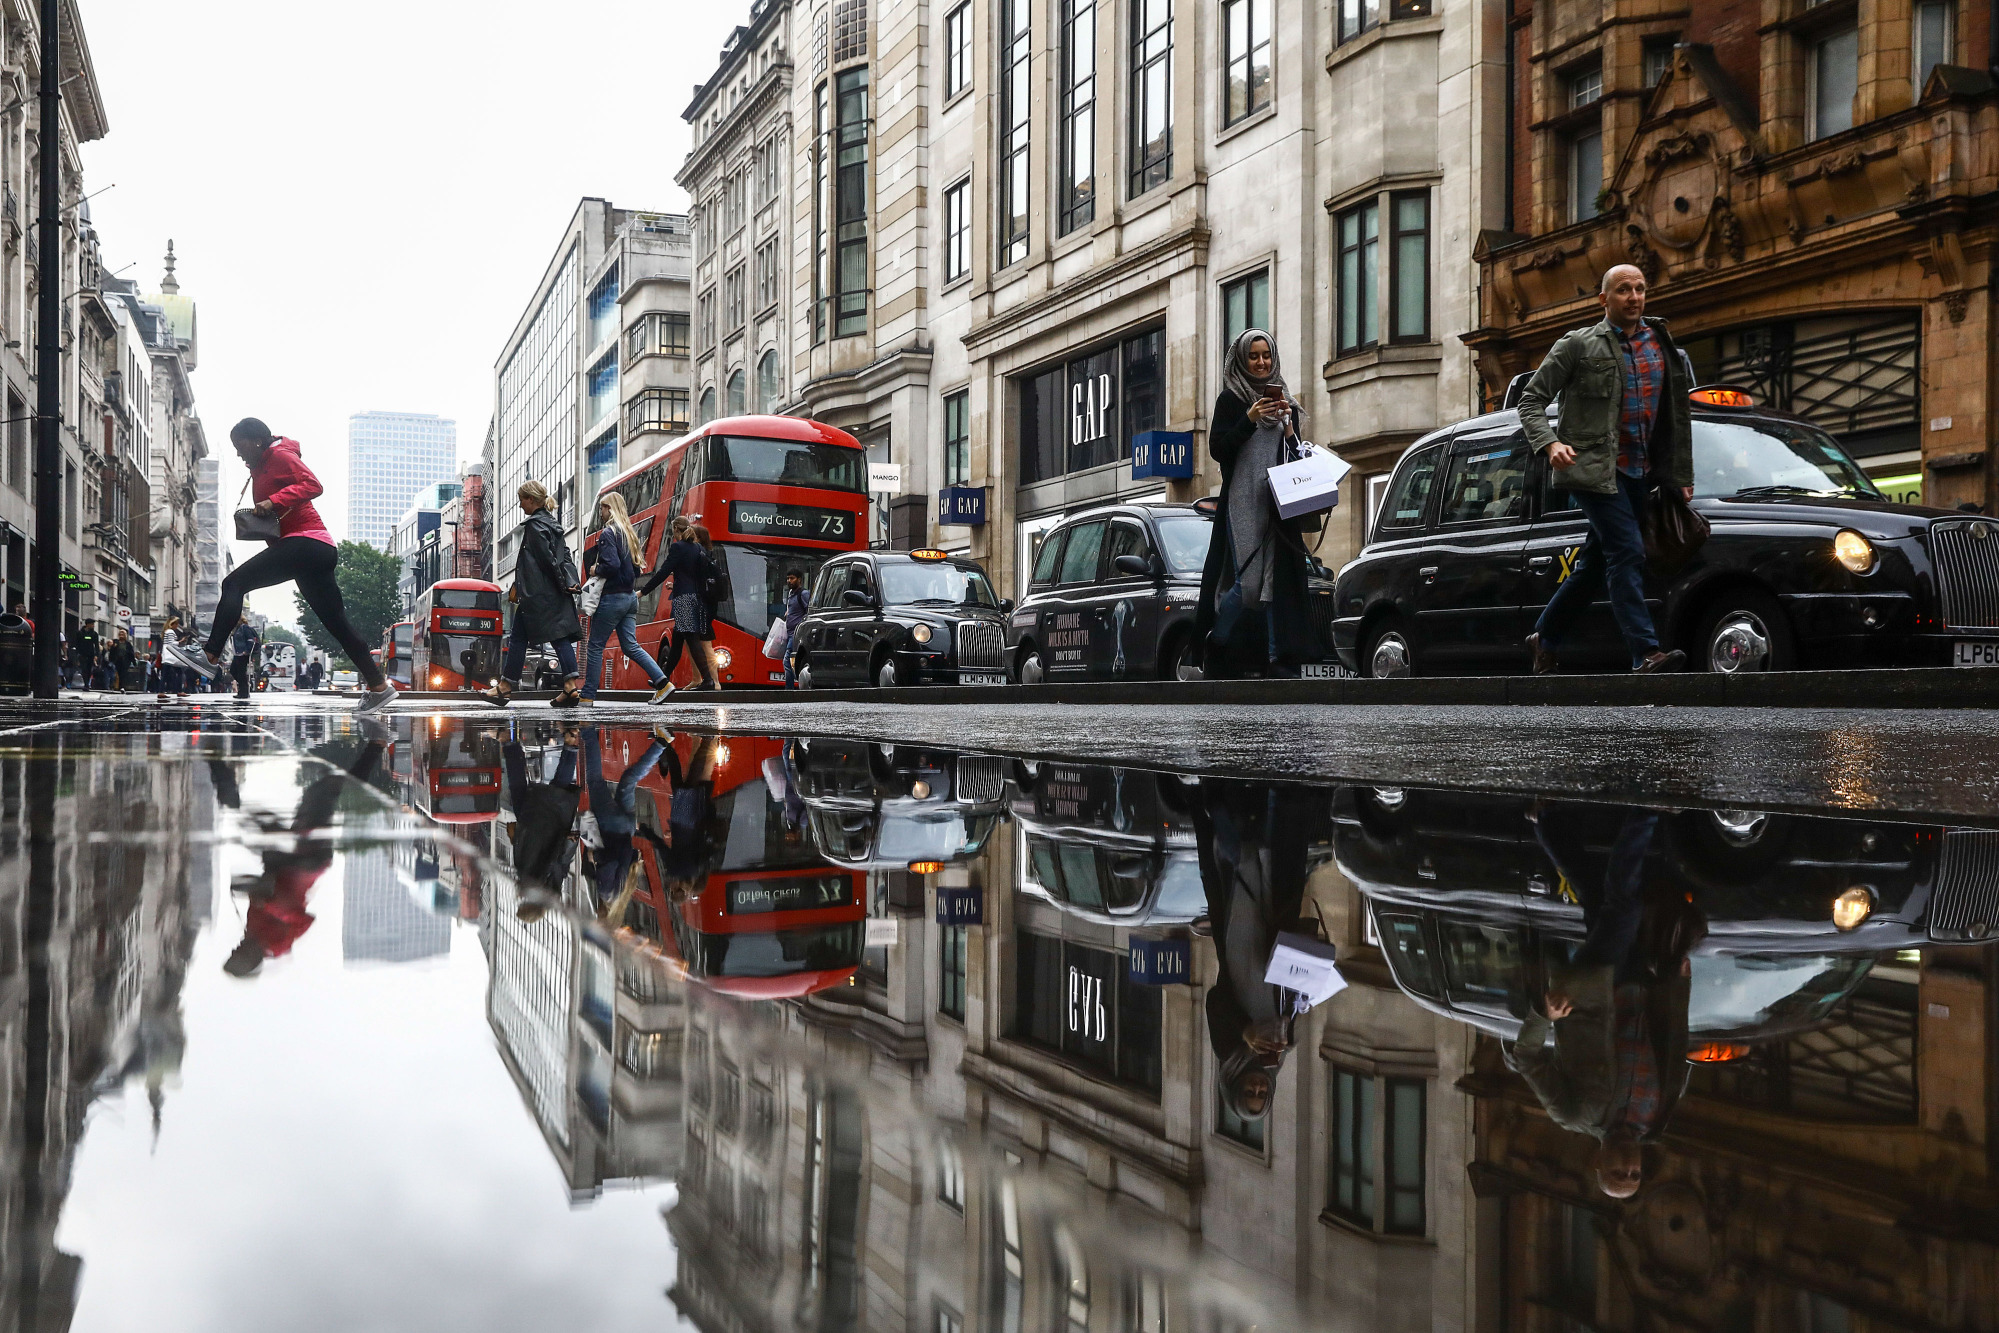 A puddle reflects pedestrians, buses, taxis in London.